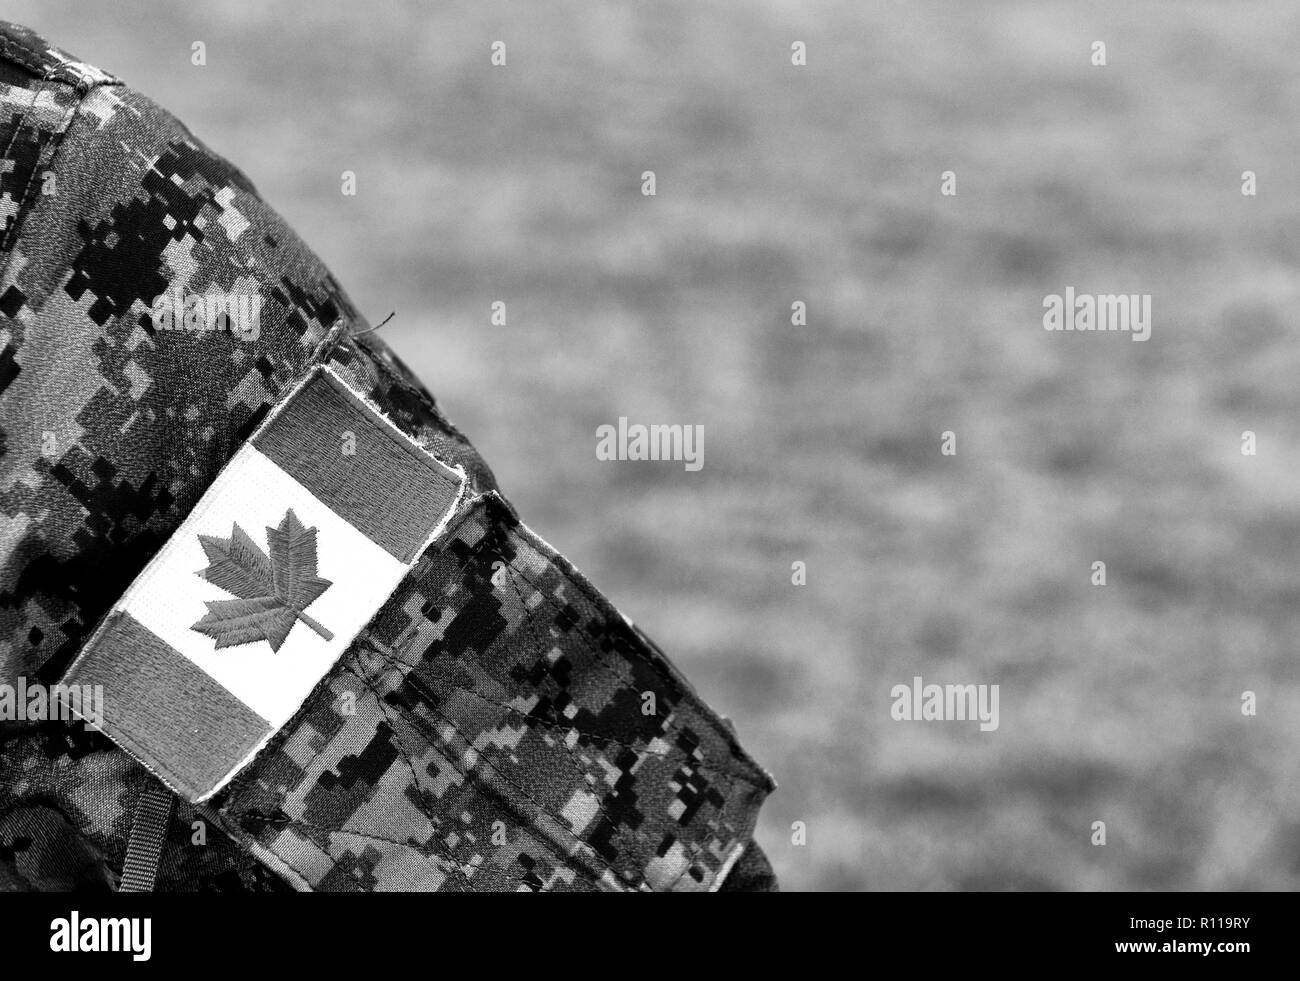 Canadian troops. Canadian Army. Canada flags on soldiers arm. Stock Photo